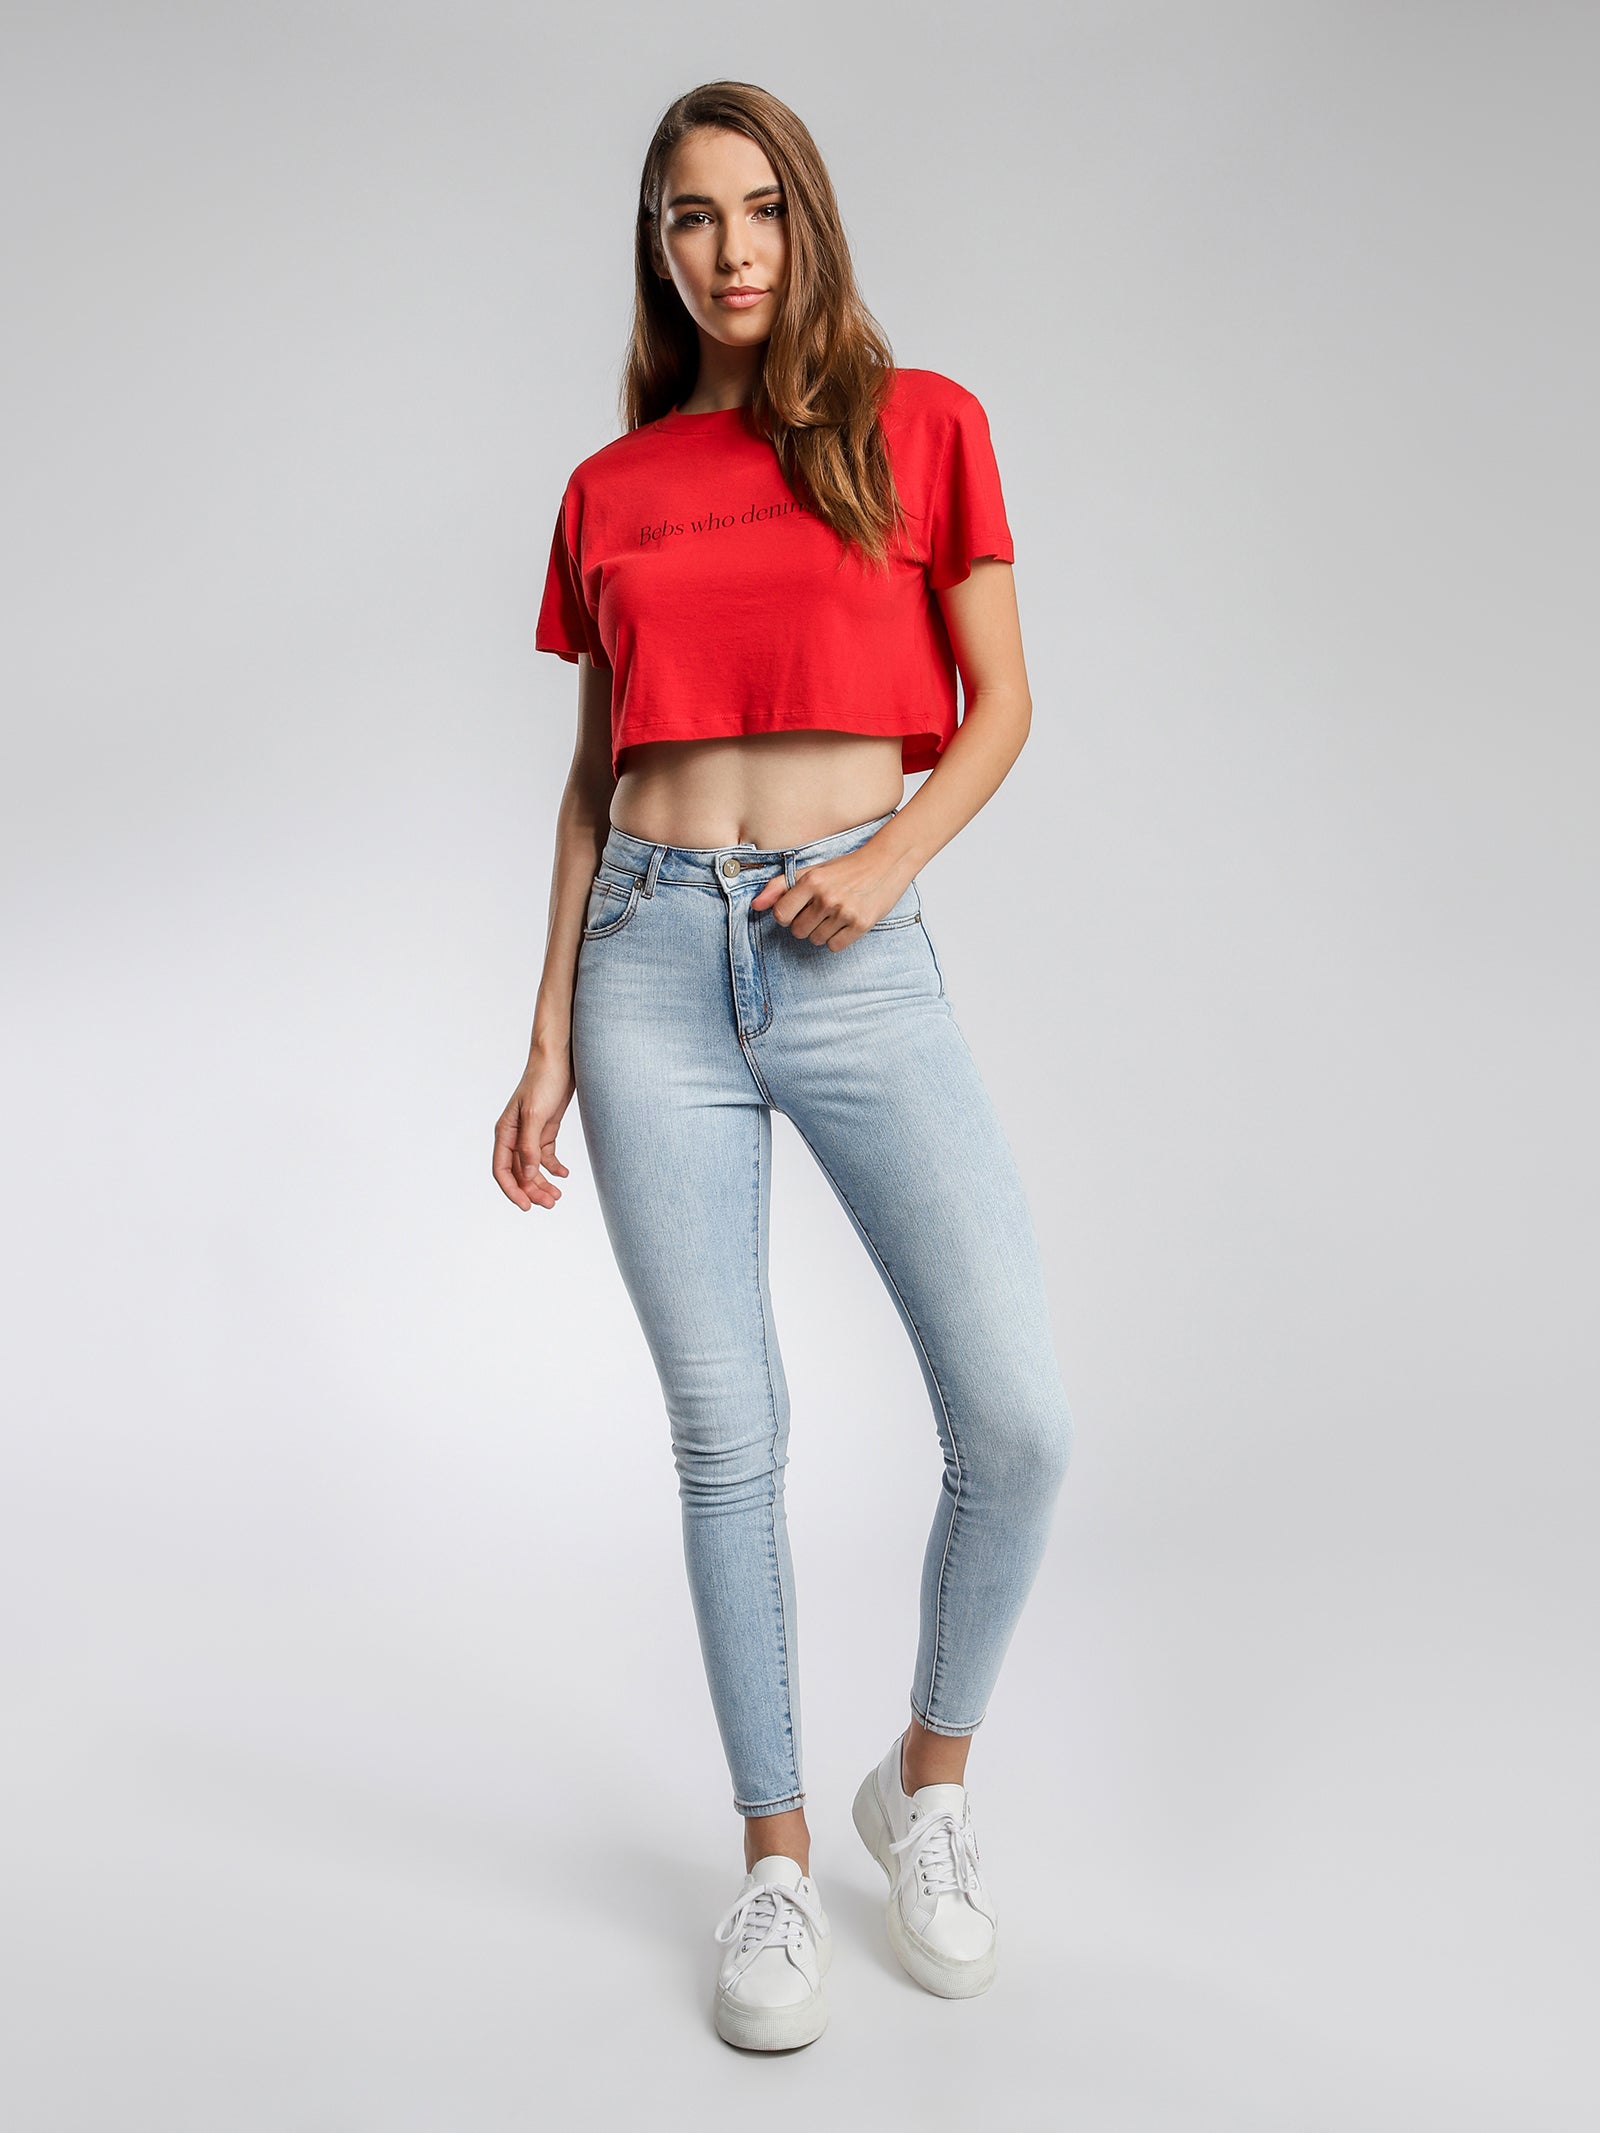 cropped red shirt